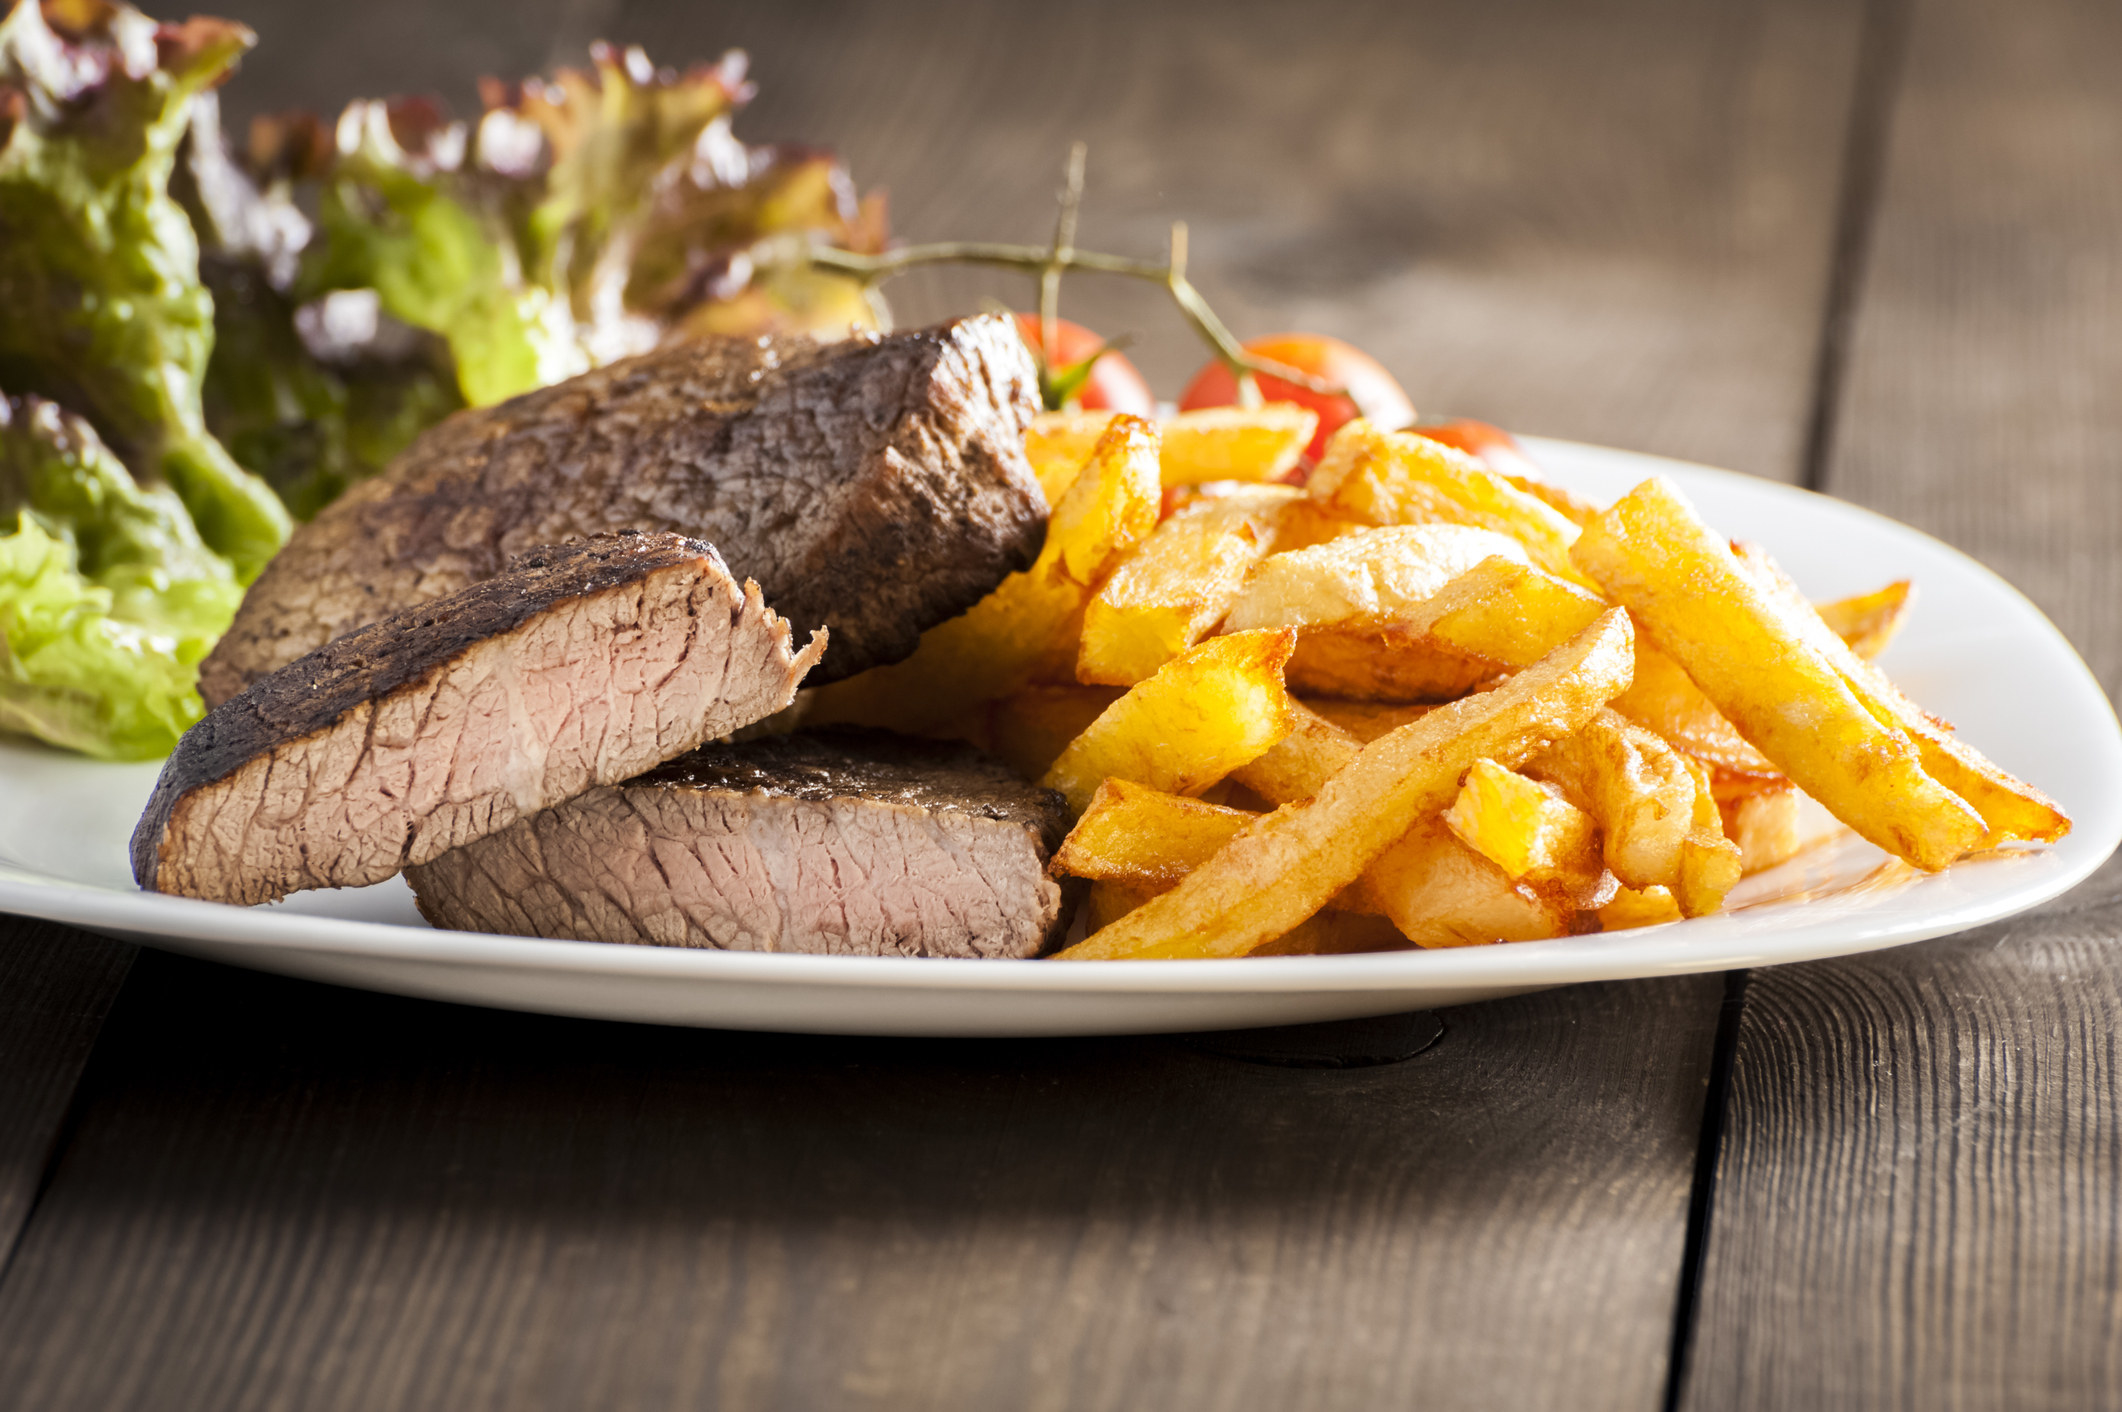 a well done cooked steak on a plate with fries